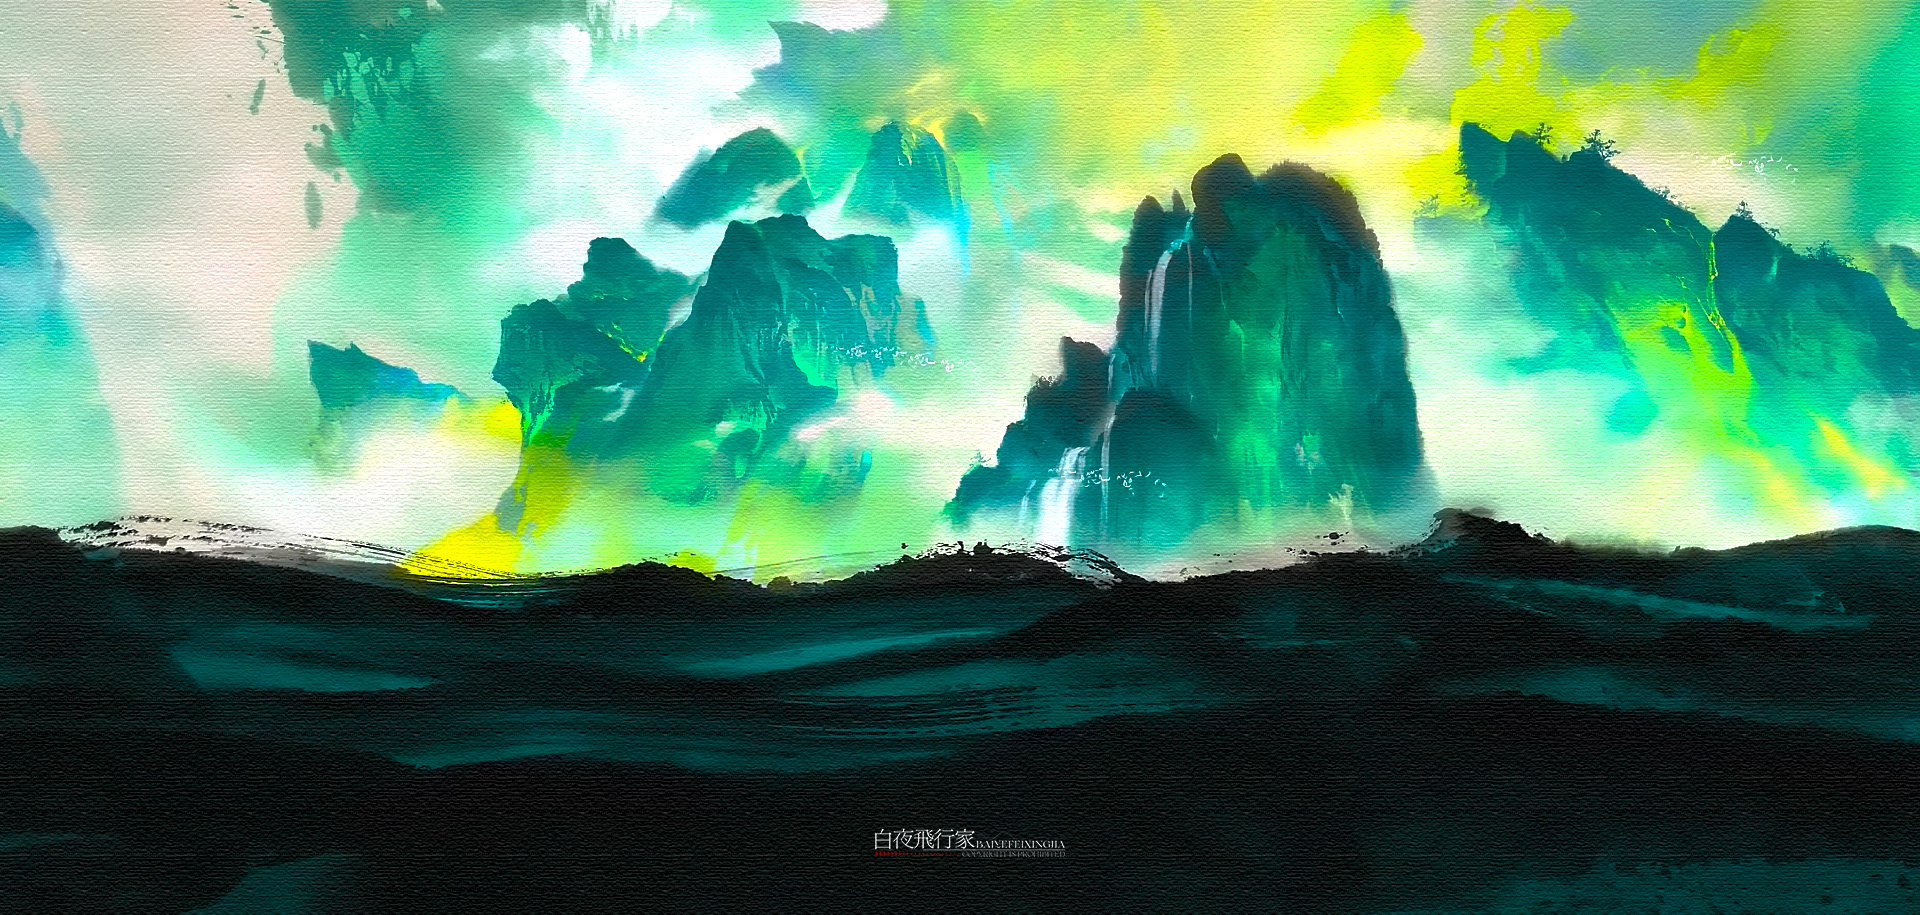 Anime 1920x915 Fog Hill of Five Elements colorful anime mountains water waterfall artwork Chinese